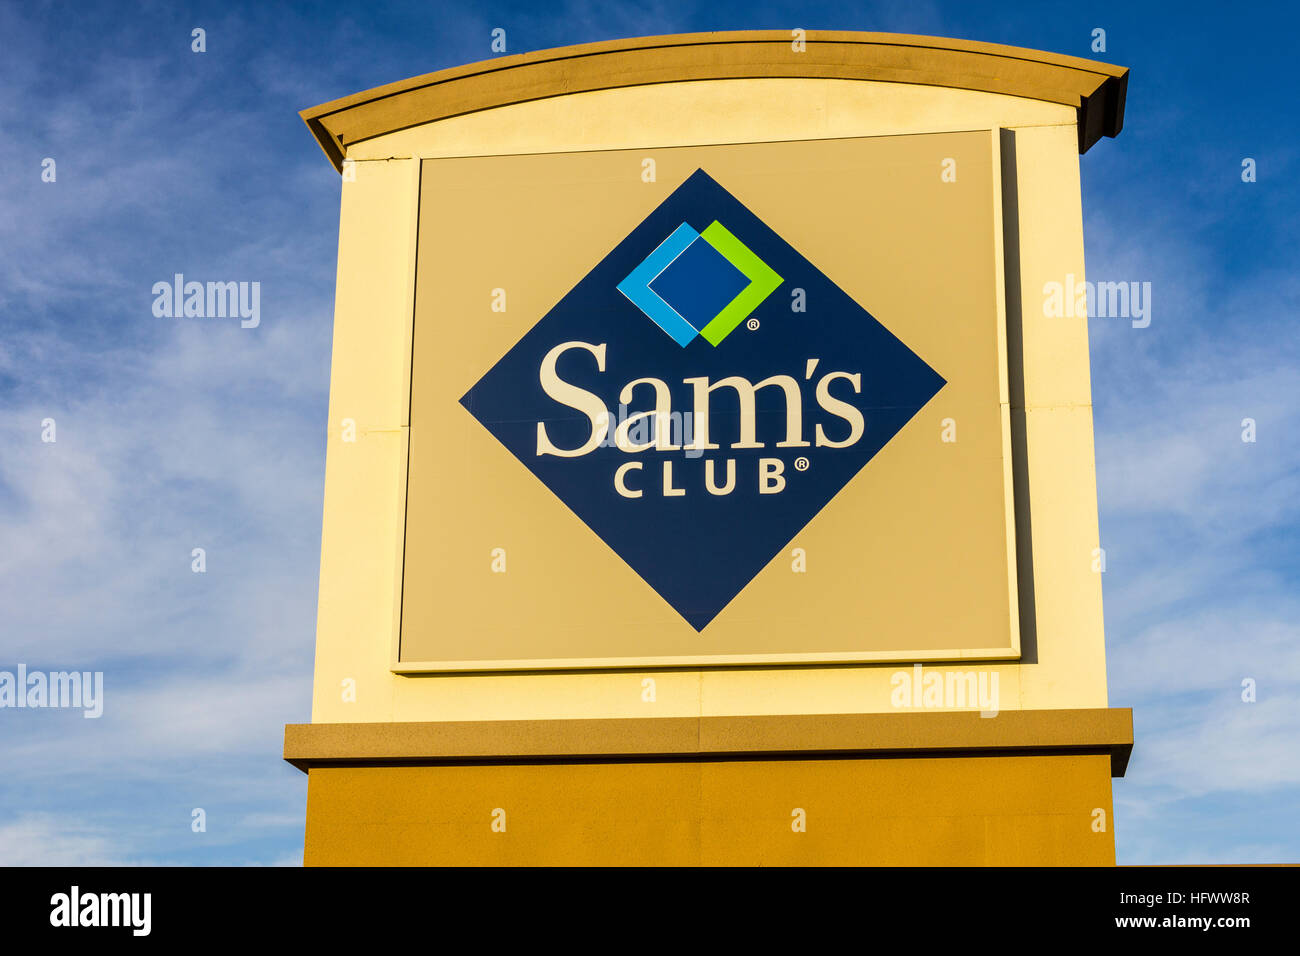 Las Vegas - Circa December 2016: Sam's Club Warehouse Logo and Signage. Sam's Club is a chain of membership only stores owned by Walmart II Stock Photo